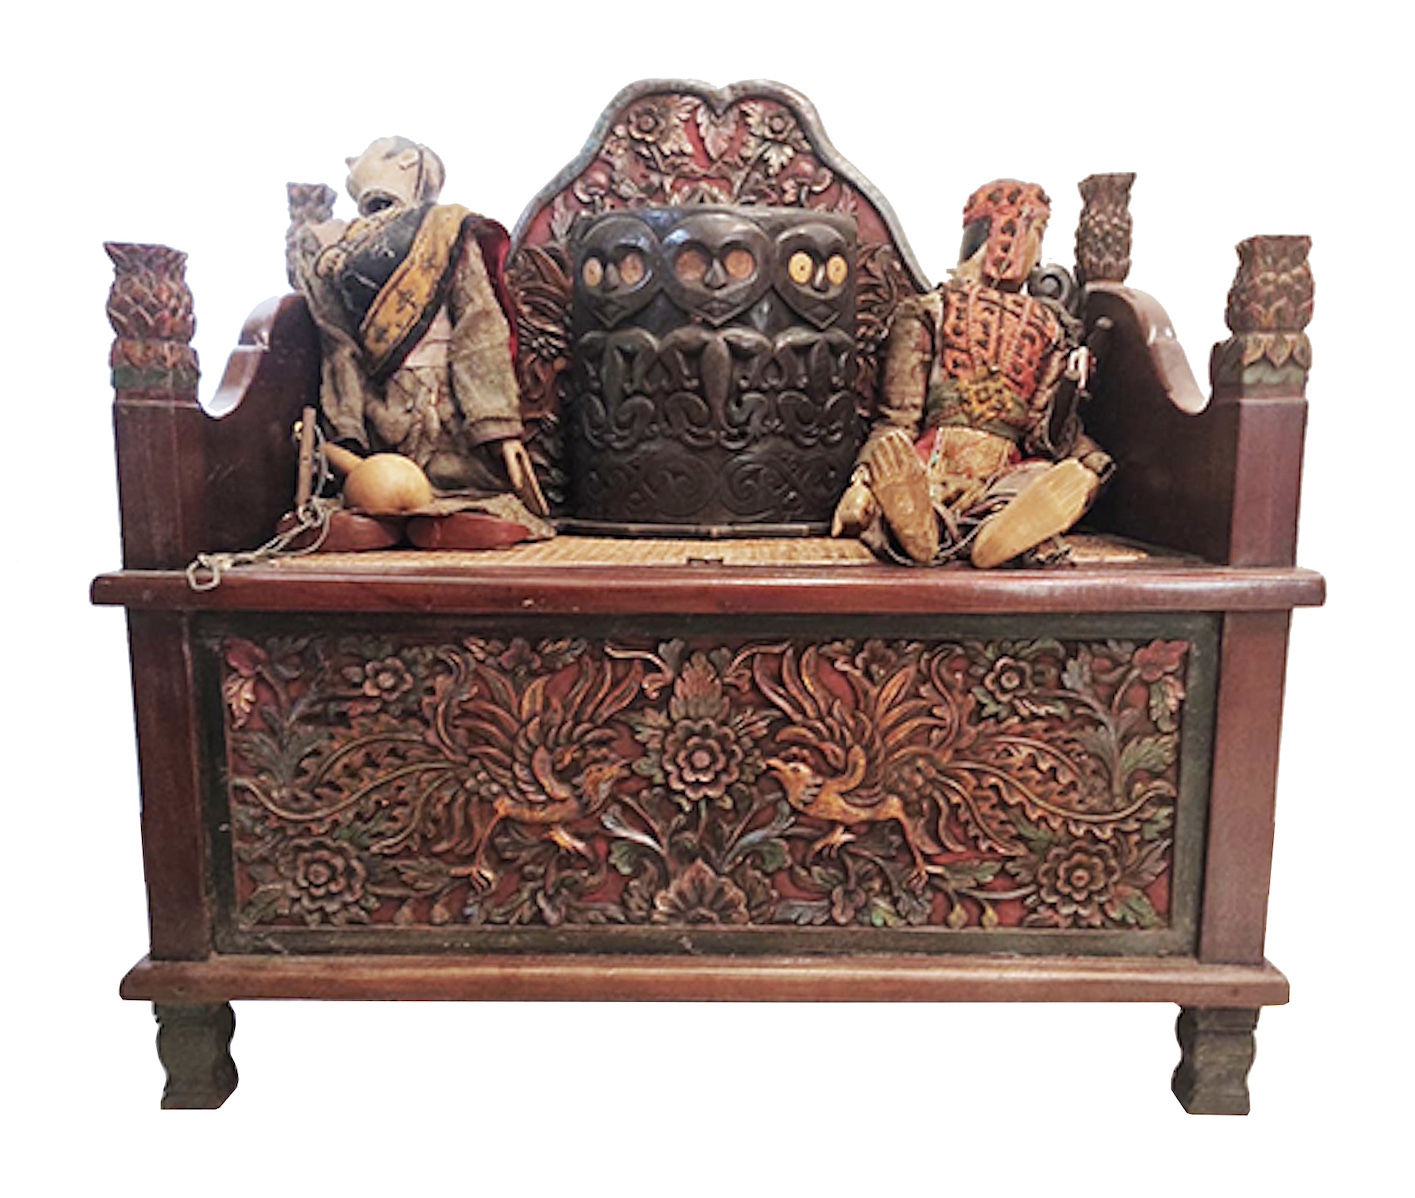 A 20th century carved polychrome teak chest ( Jodang)